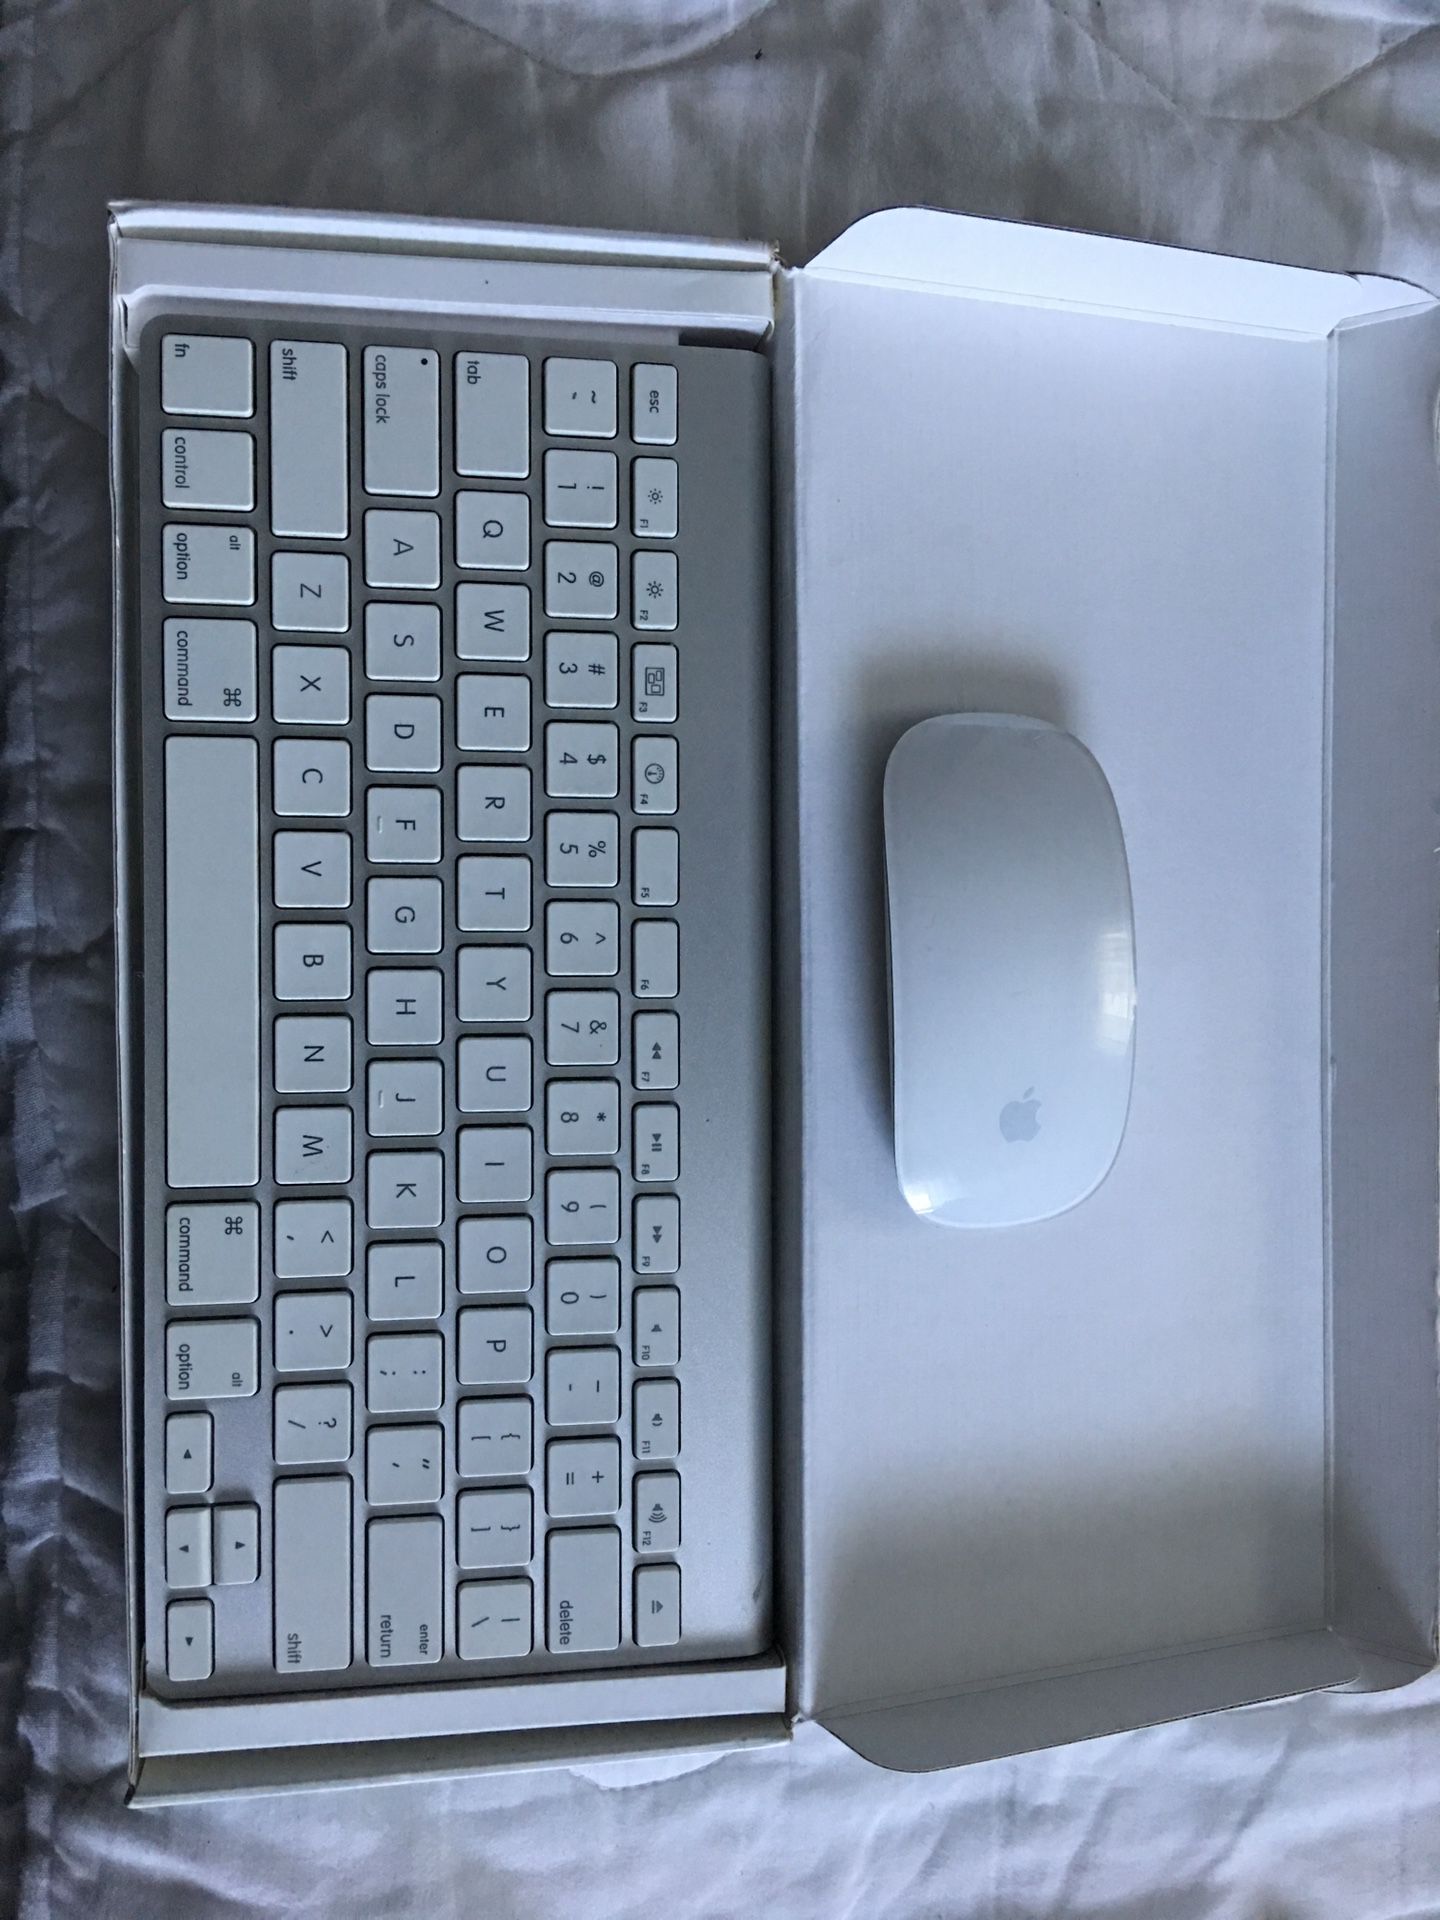 Apple wireless keyboard and mouse plus USB Super Drive